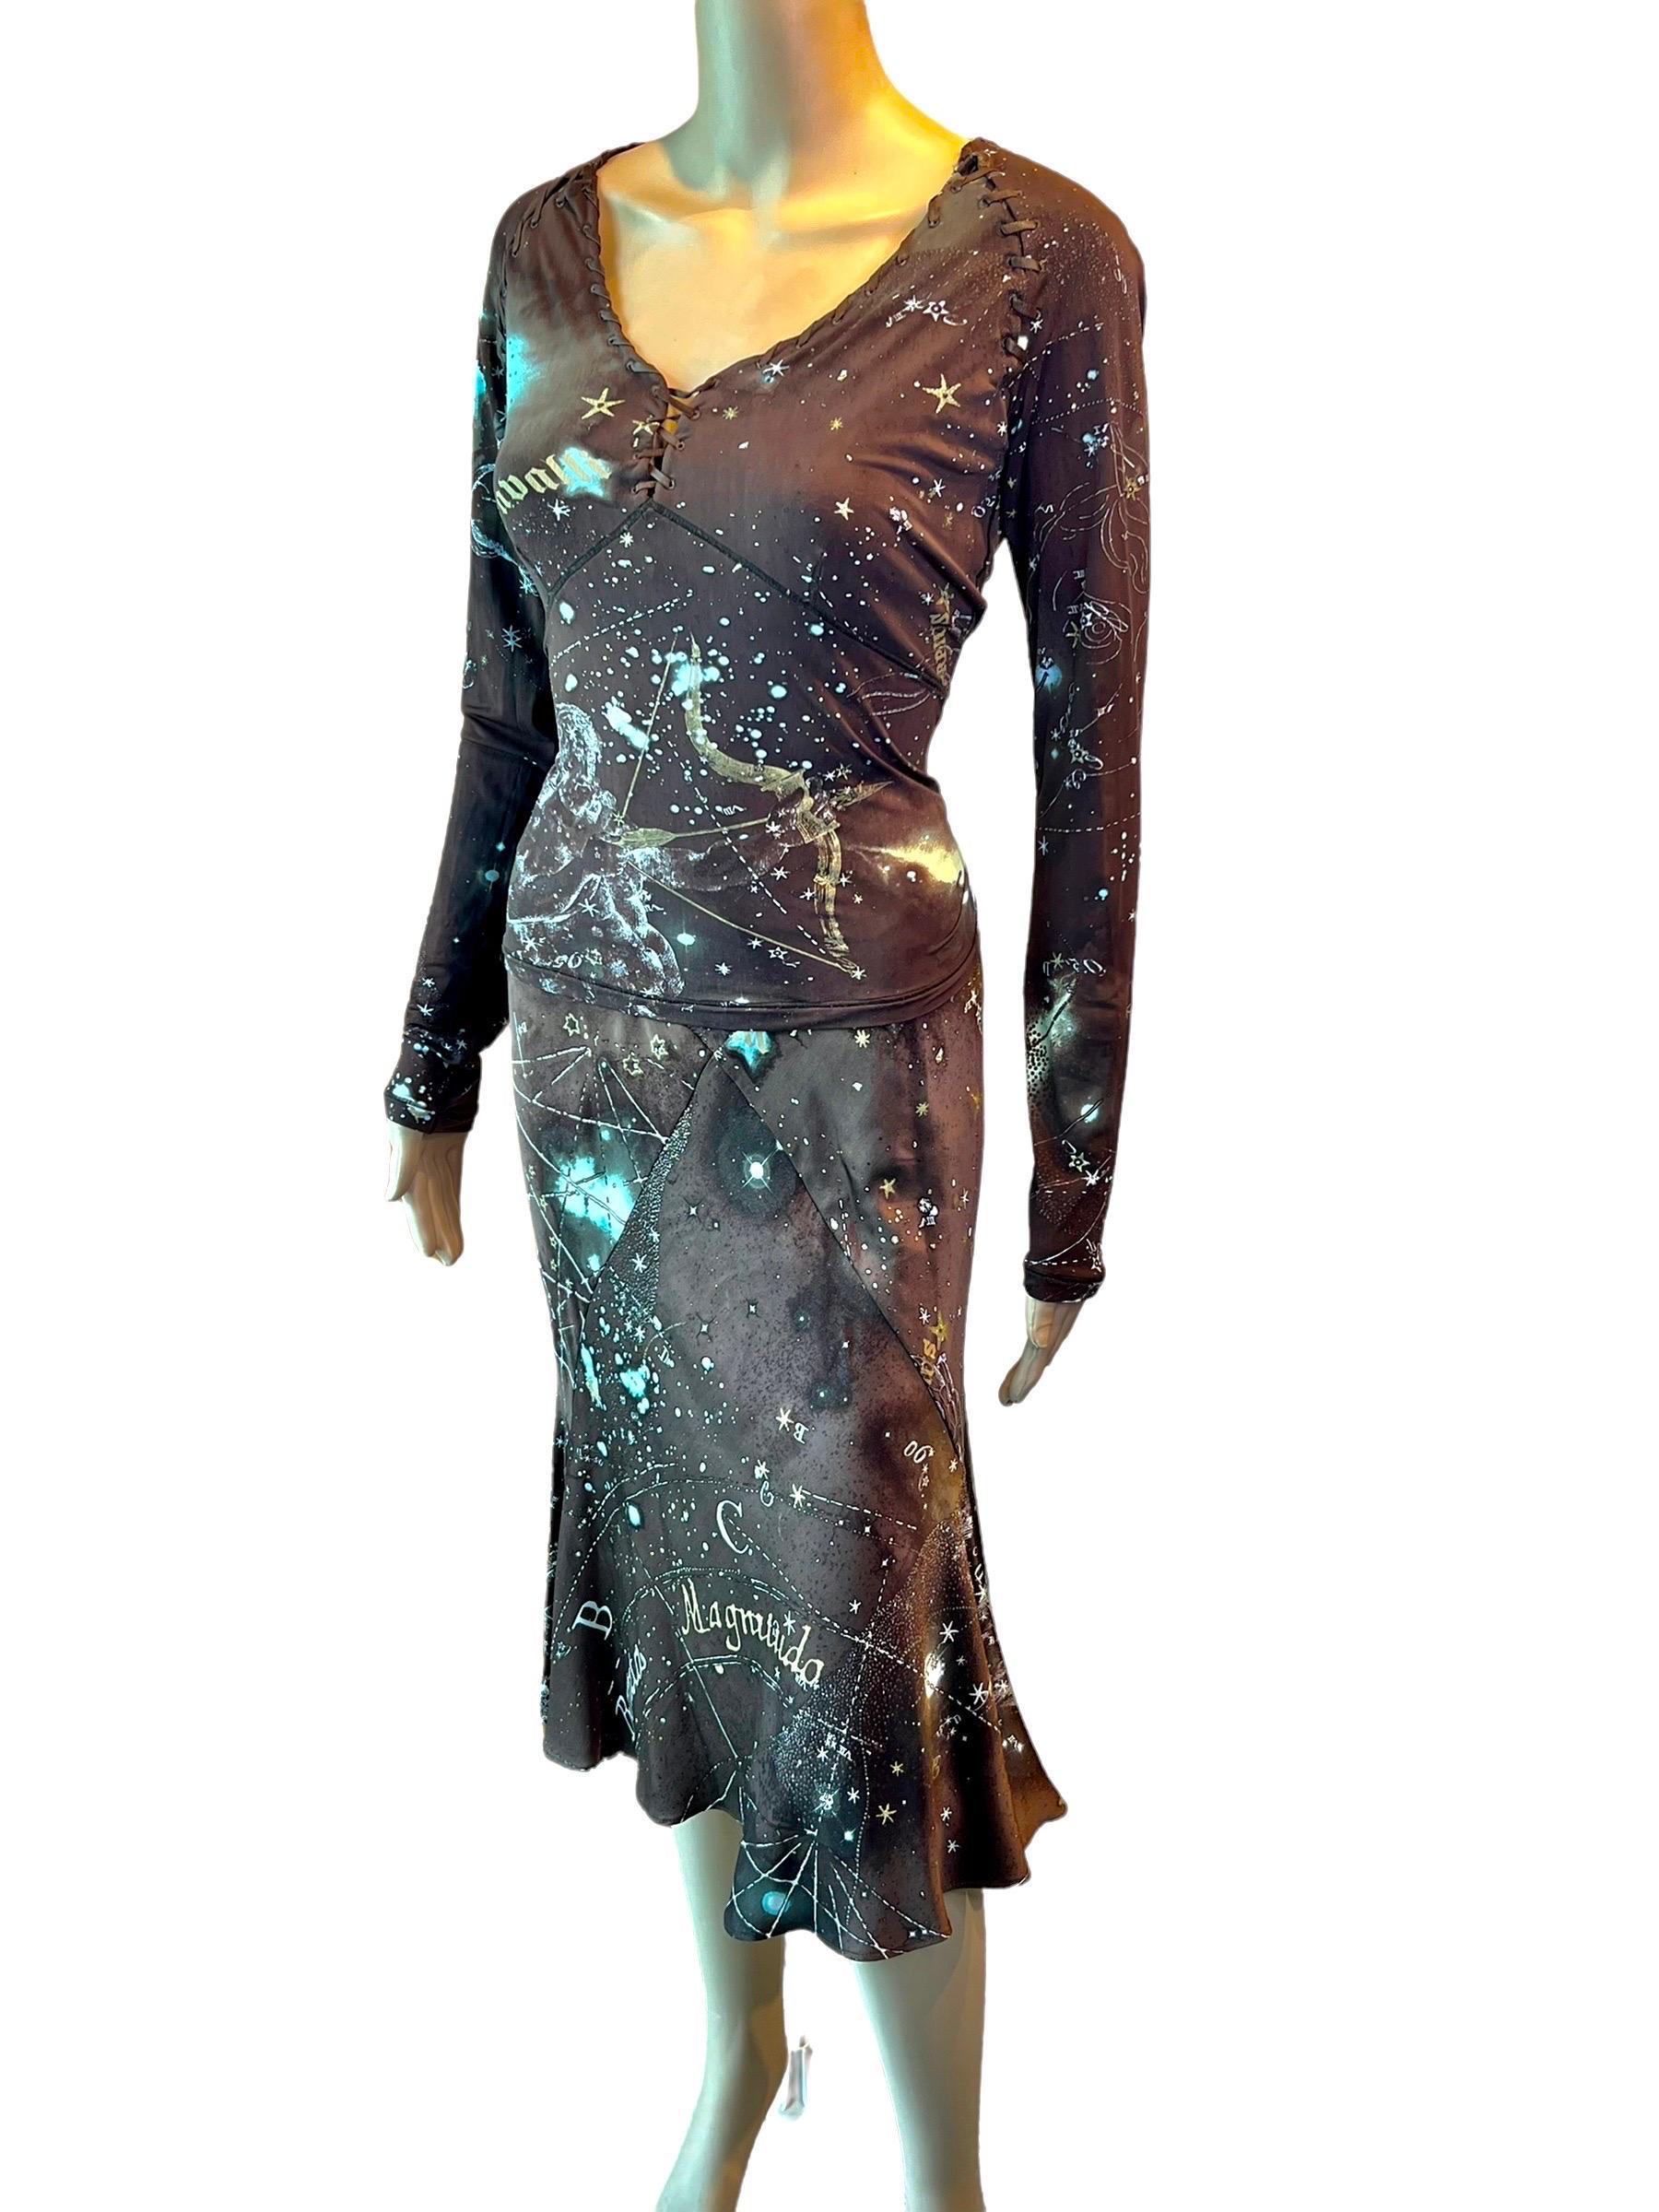 Roberto Cavalli F/W 2003 Constellation Astrology Print Skirt and Top 2 Piece Set For Sale 2